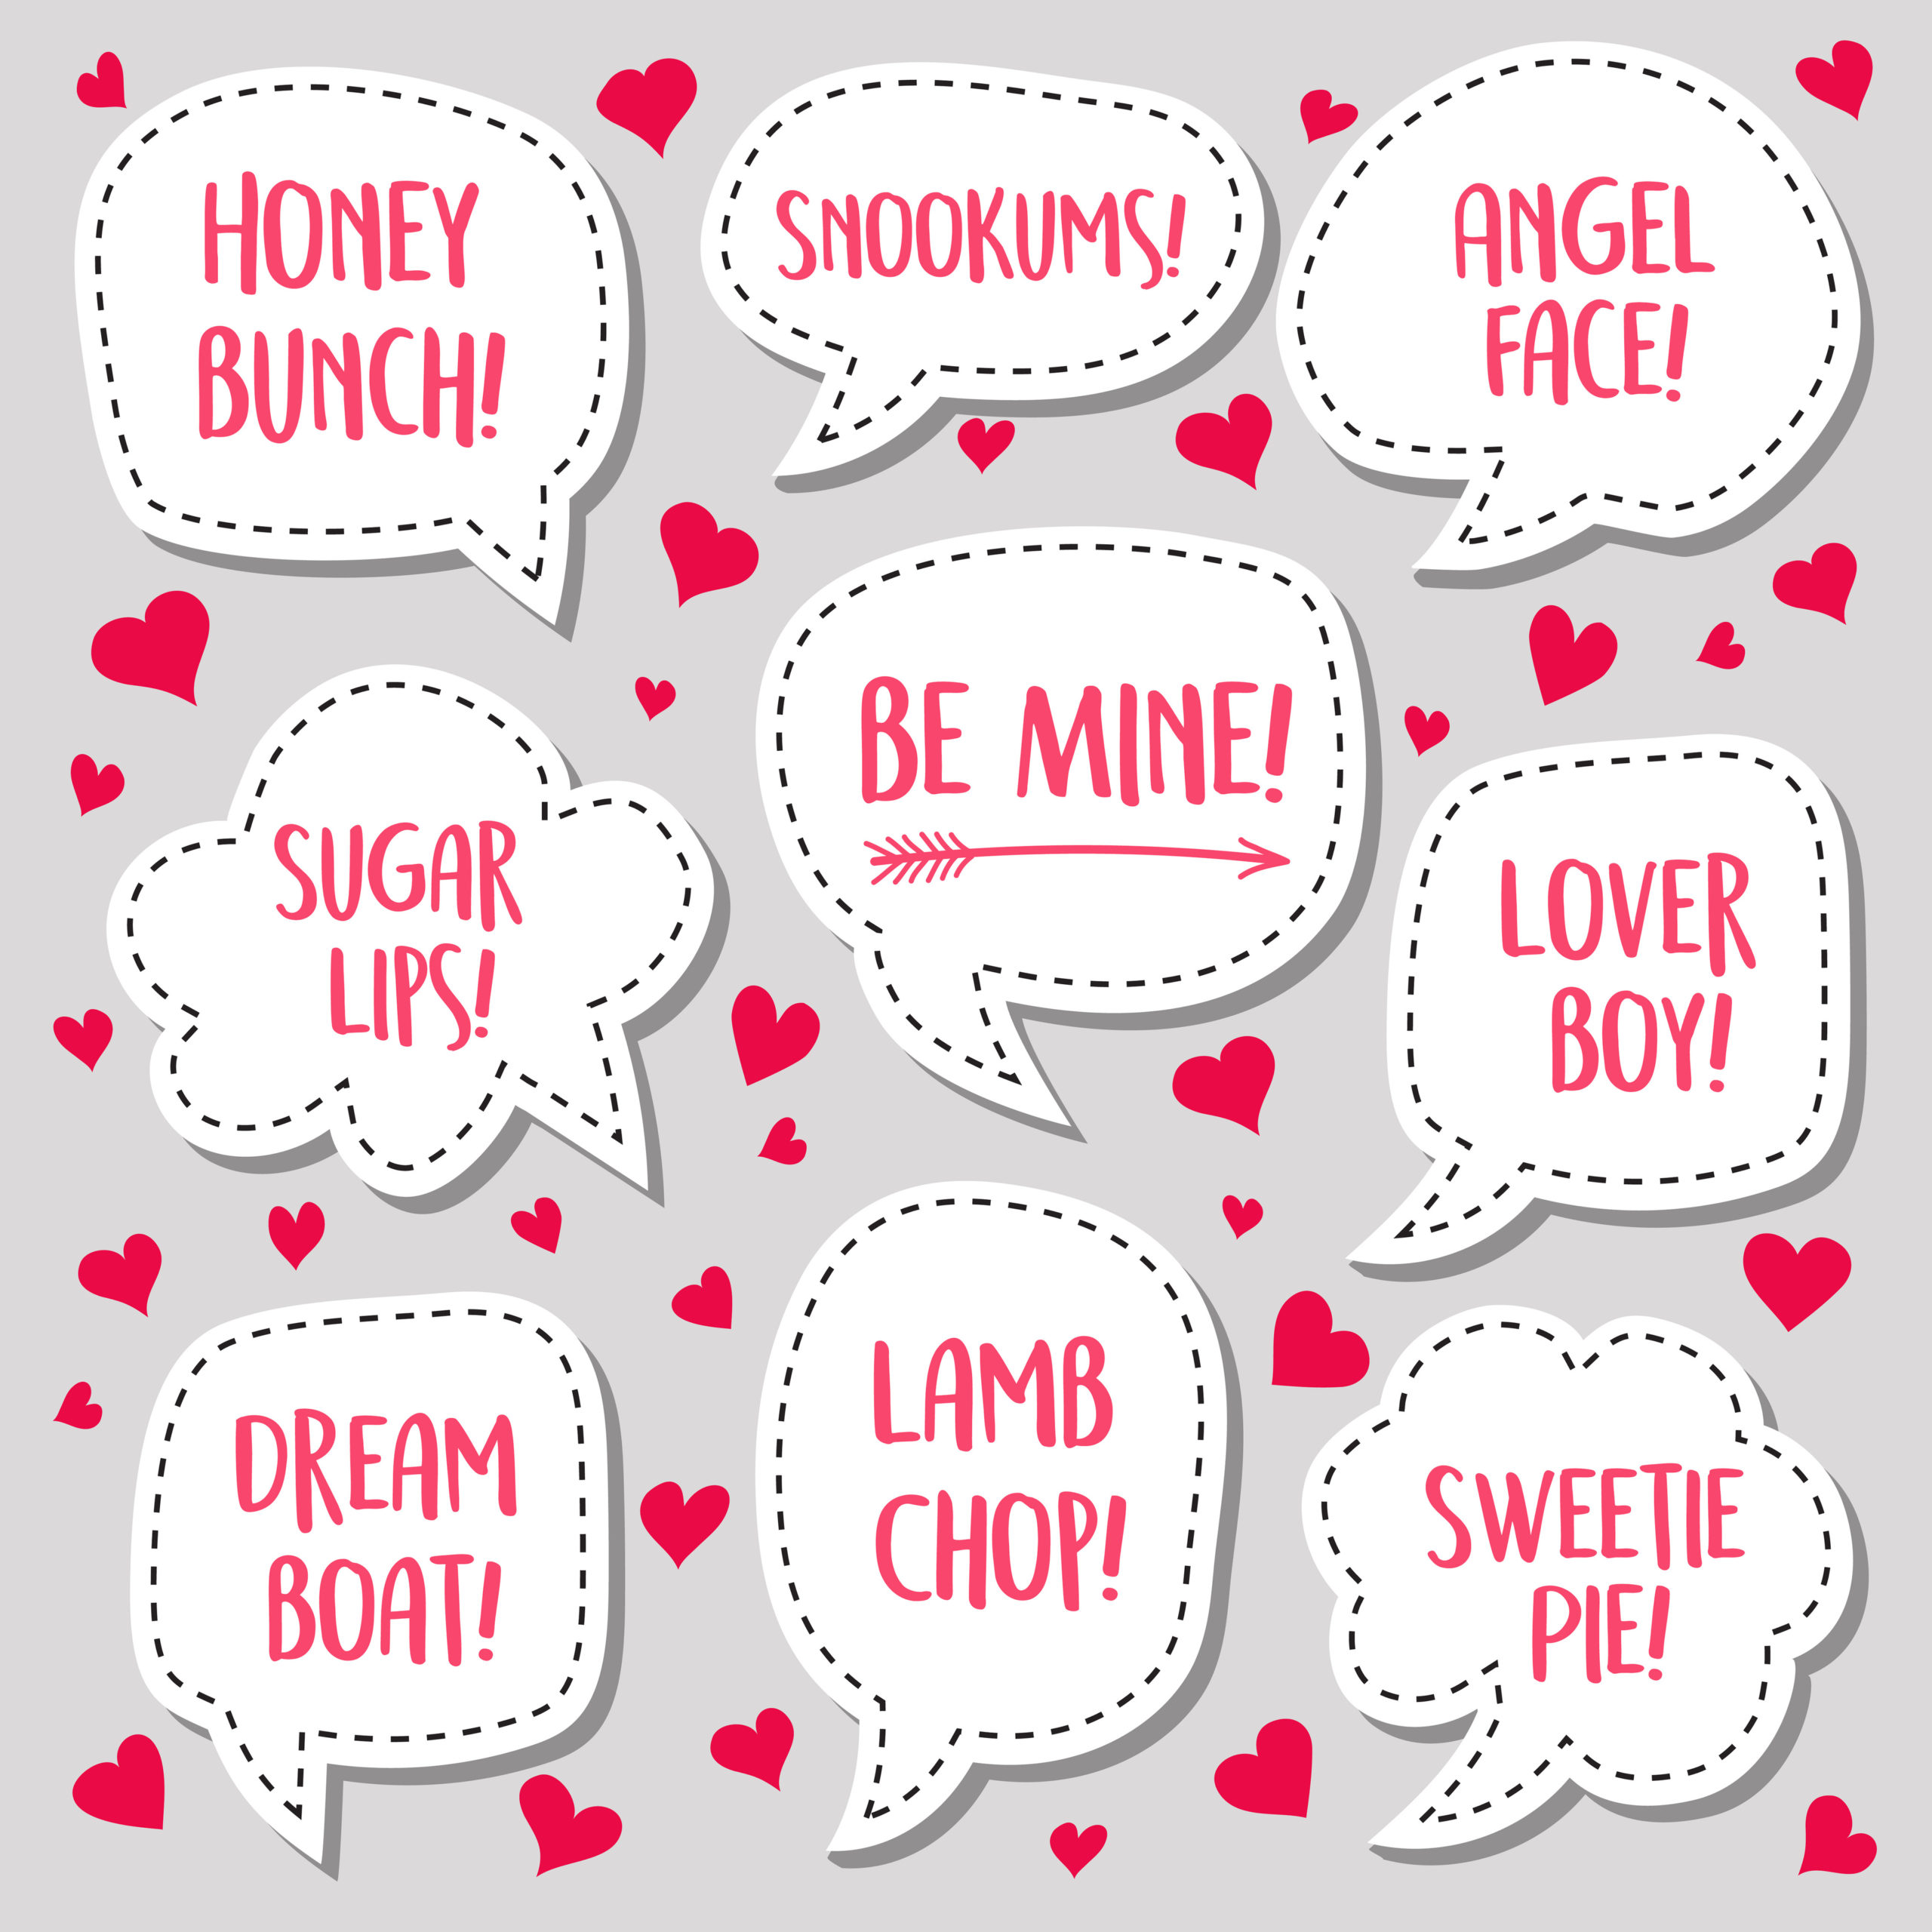 Valentines Day talk bubbles with cute names and phrases for stickers, scrapbooks, greeting cards, banners.